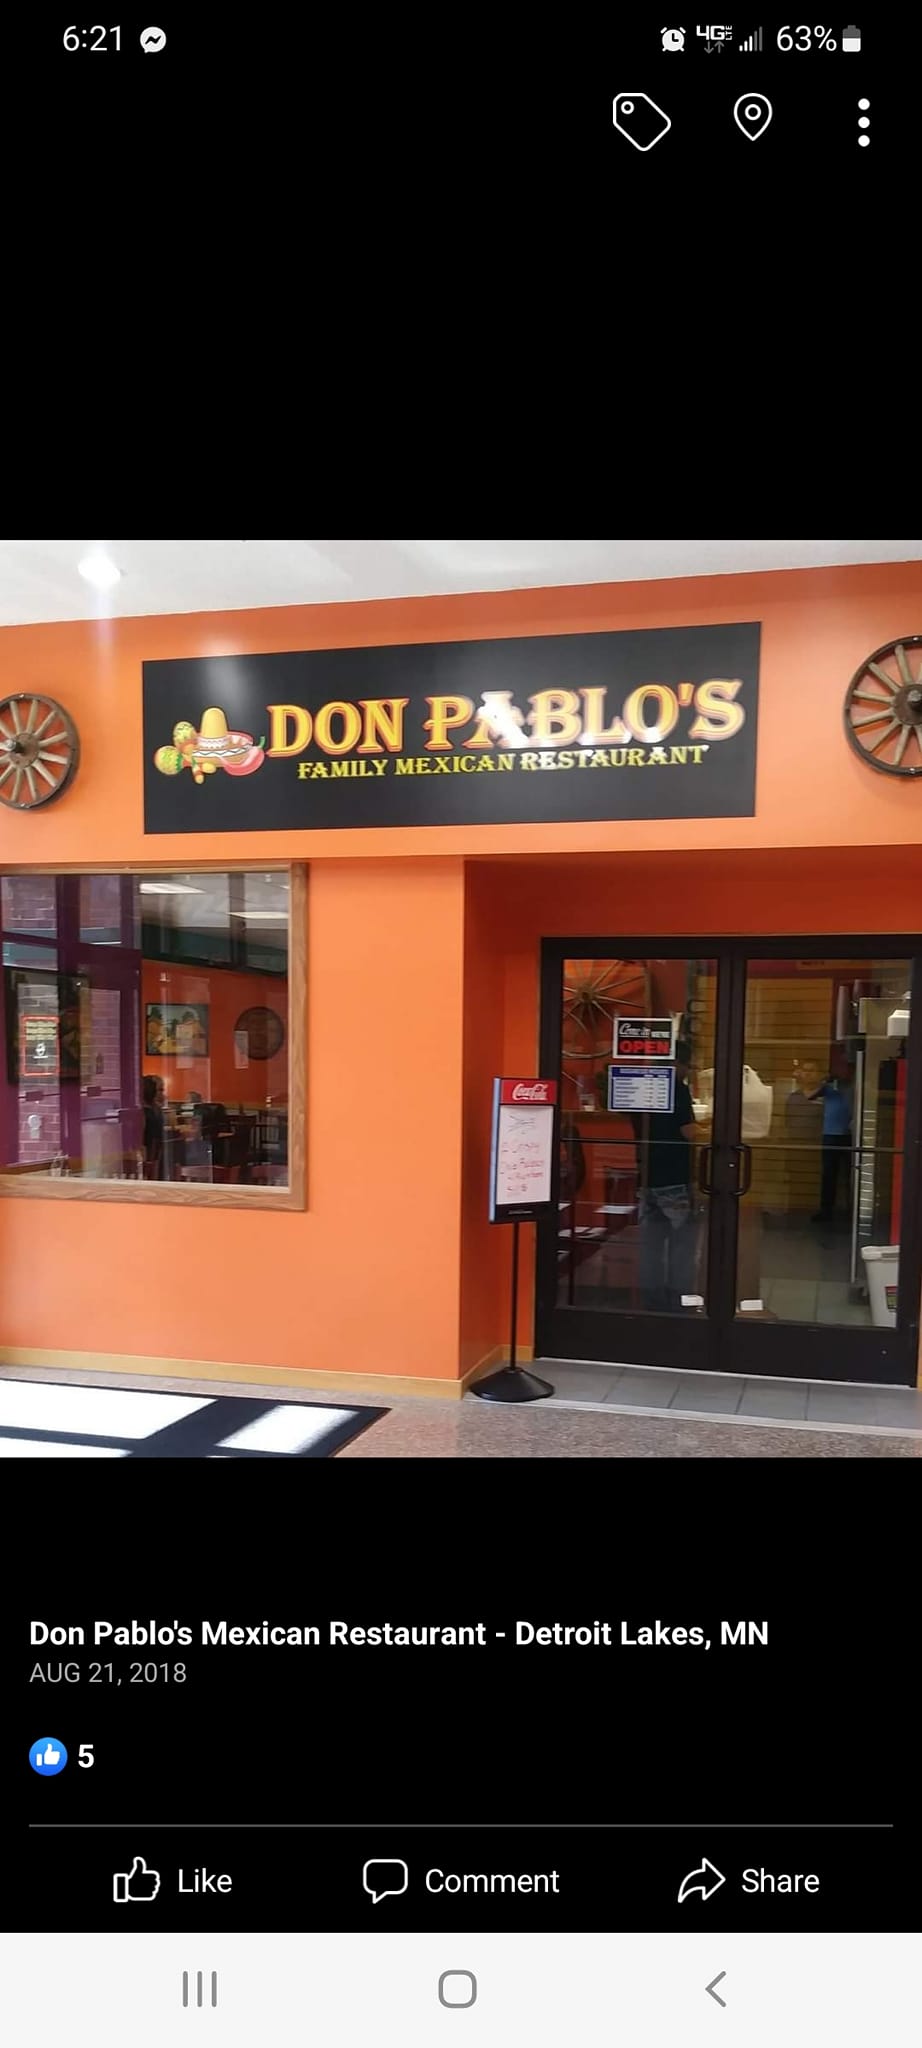 Don Pablo's Family Mexican Restaurant